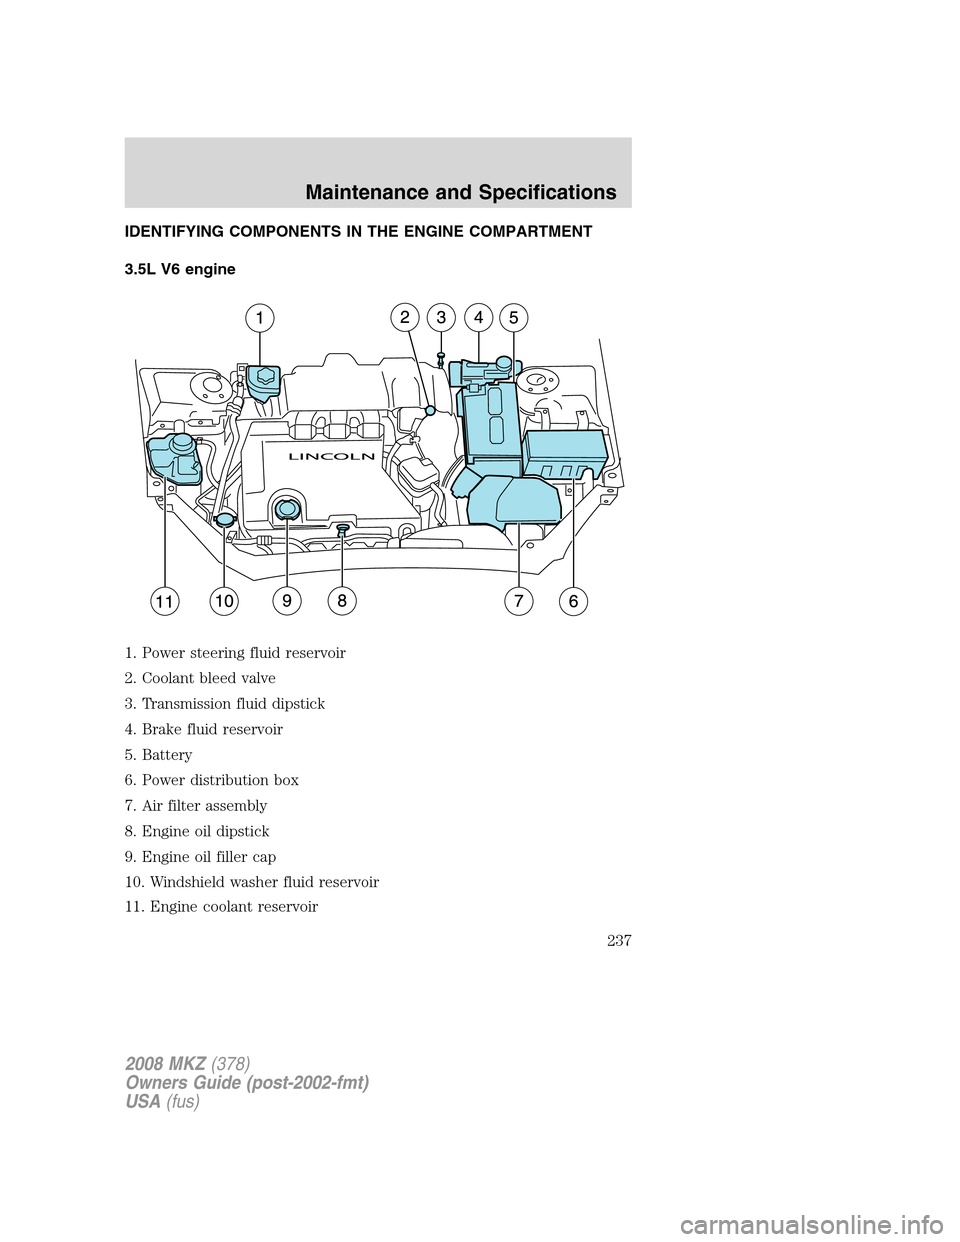 LINCOLN MKZ 2008  Owners Manual IDENTIFYING COMPONENTS IN THE ENGINE COMPARTMENT
3.5L V6 engine
1. Power steering fluid reservoir
2. Coolant bleed valve
3. Transmission fluid dipstick
4. Brake fluid reservoir
5. Battery
6. Power dis